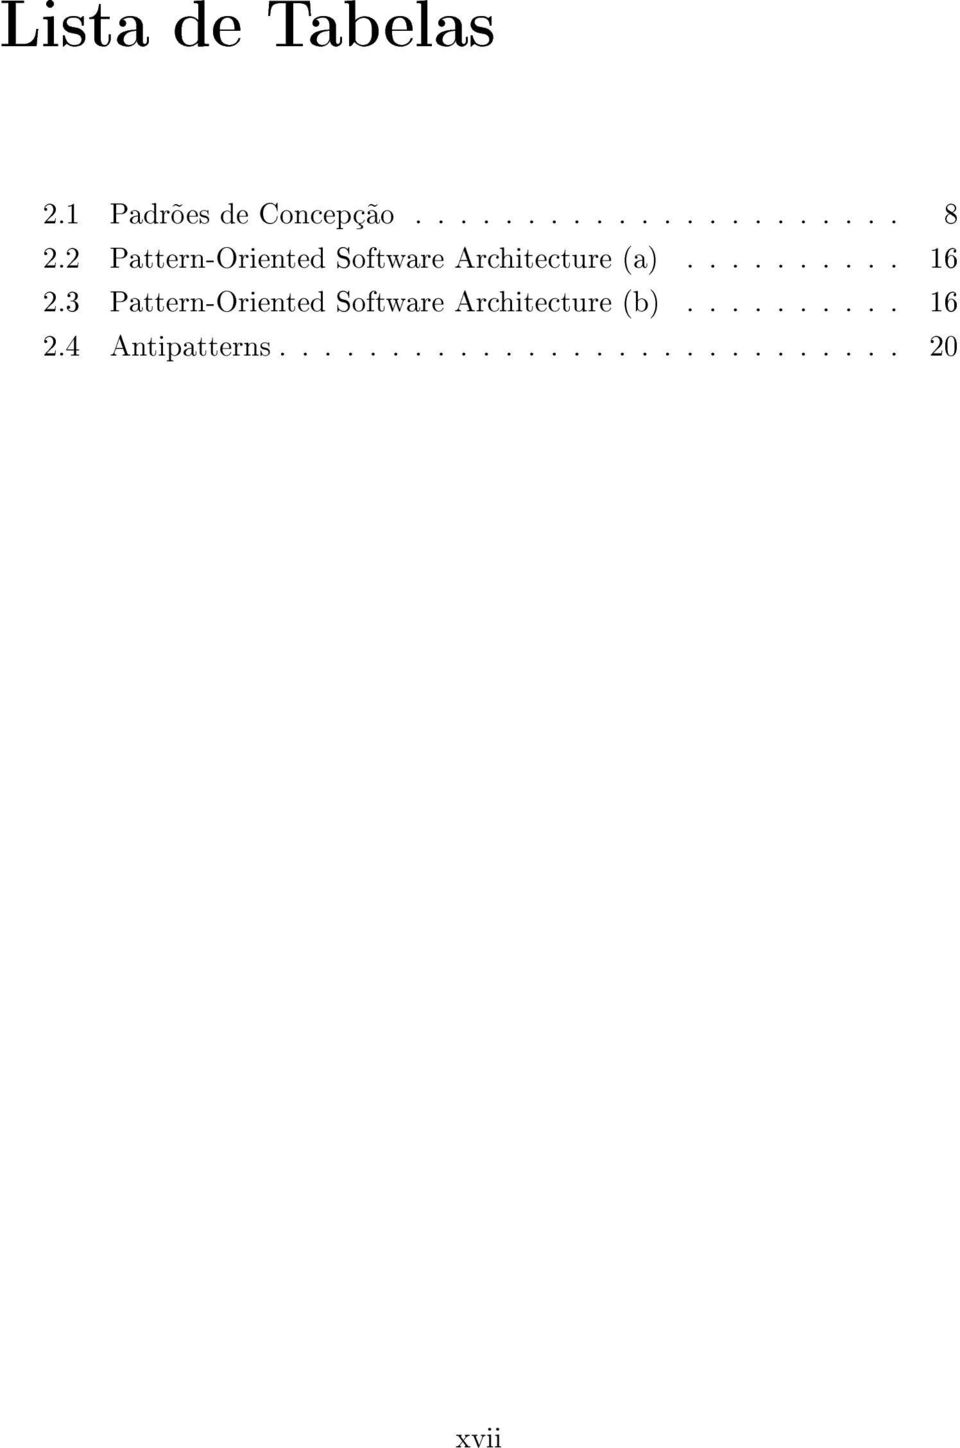 3 Pattern-Oriented Software Architecture (b).......... 16 2.